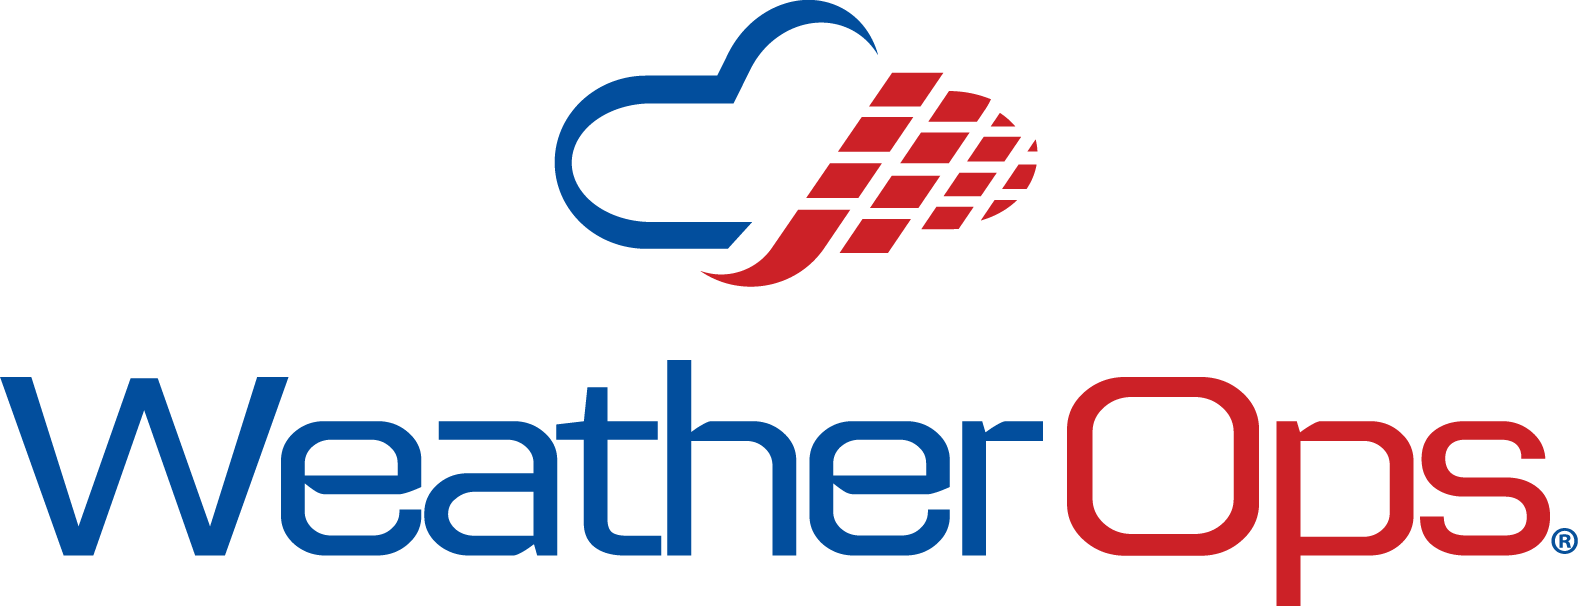 Weatherops To Provide 24/7 Monitoring For The Summer - Wdt Weatherops Logo (1578x606)